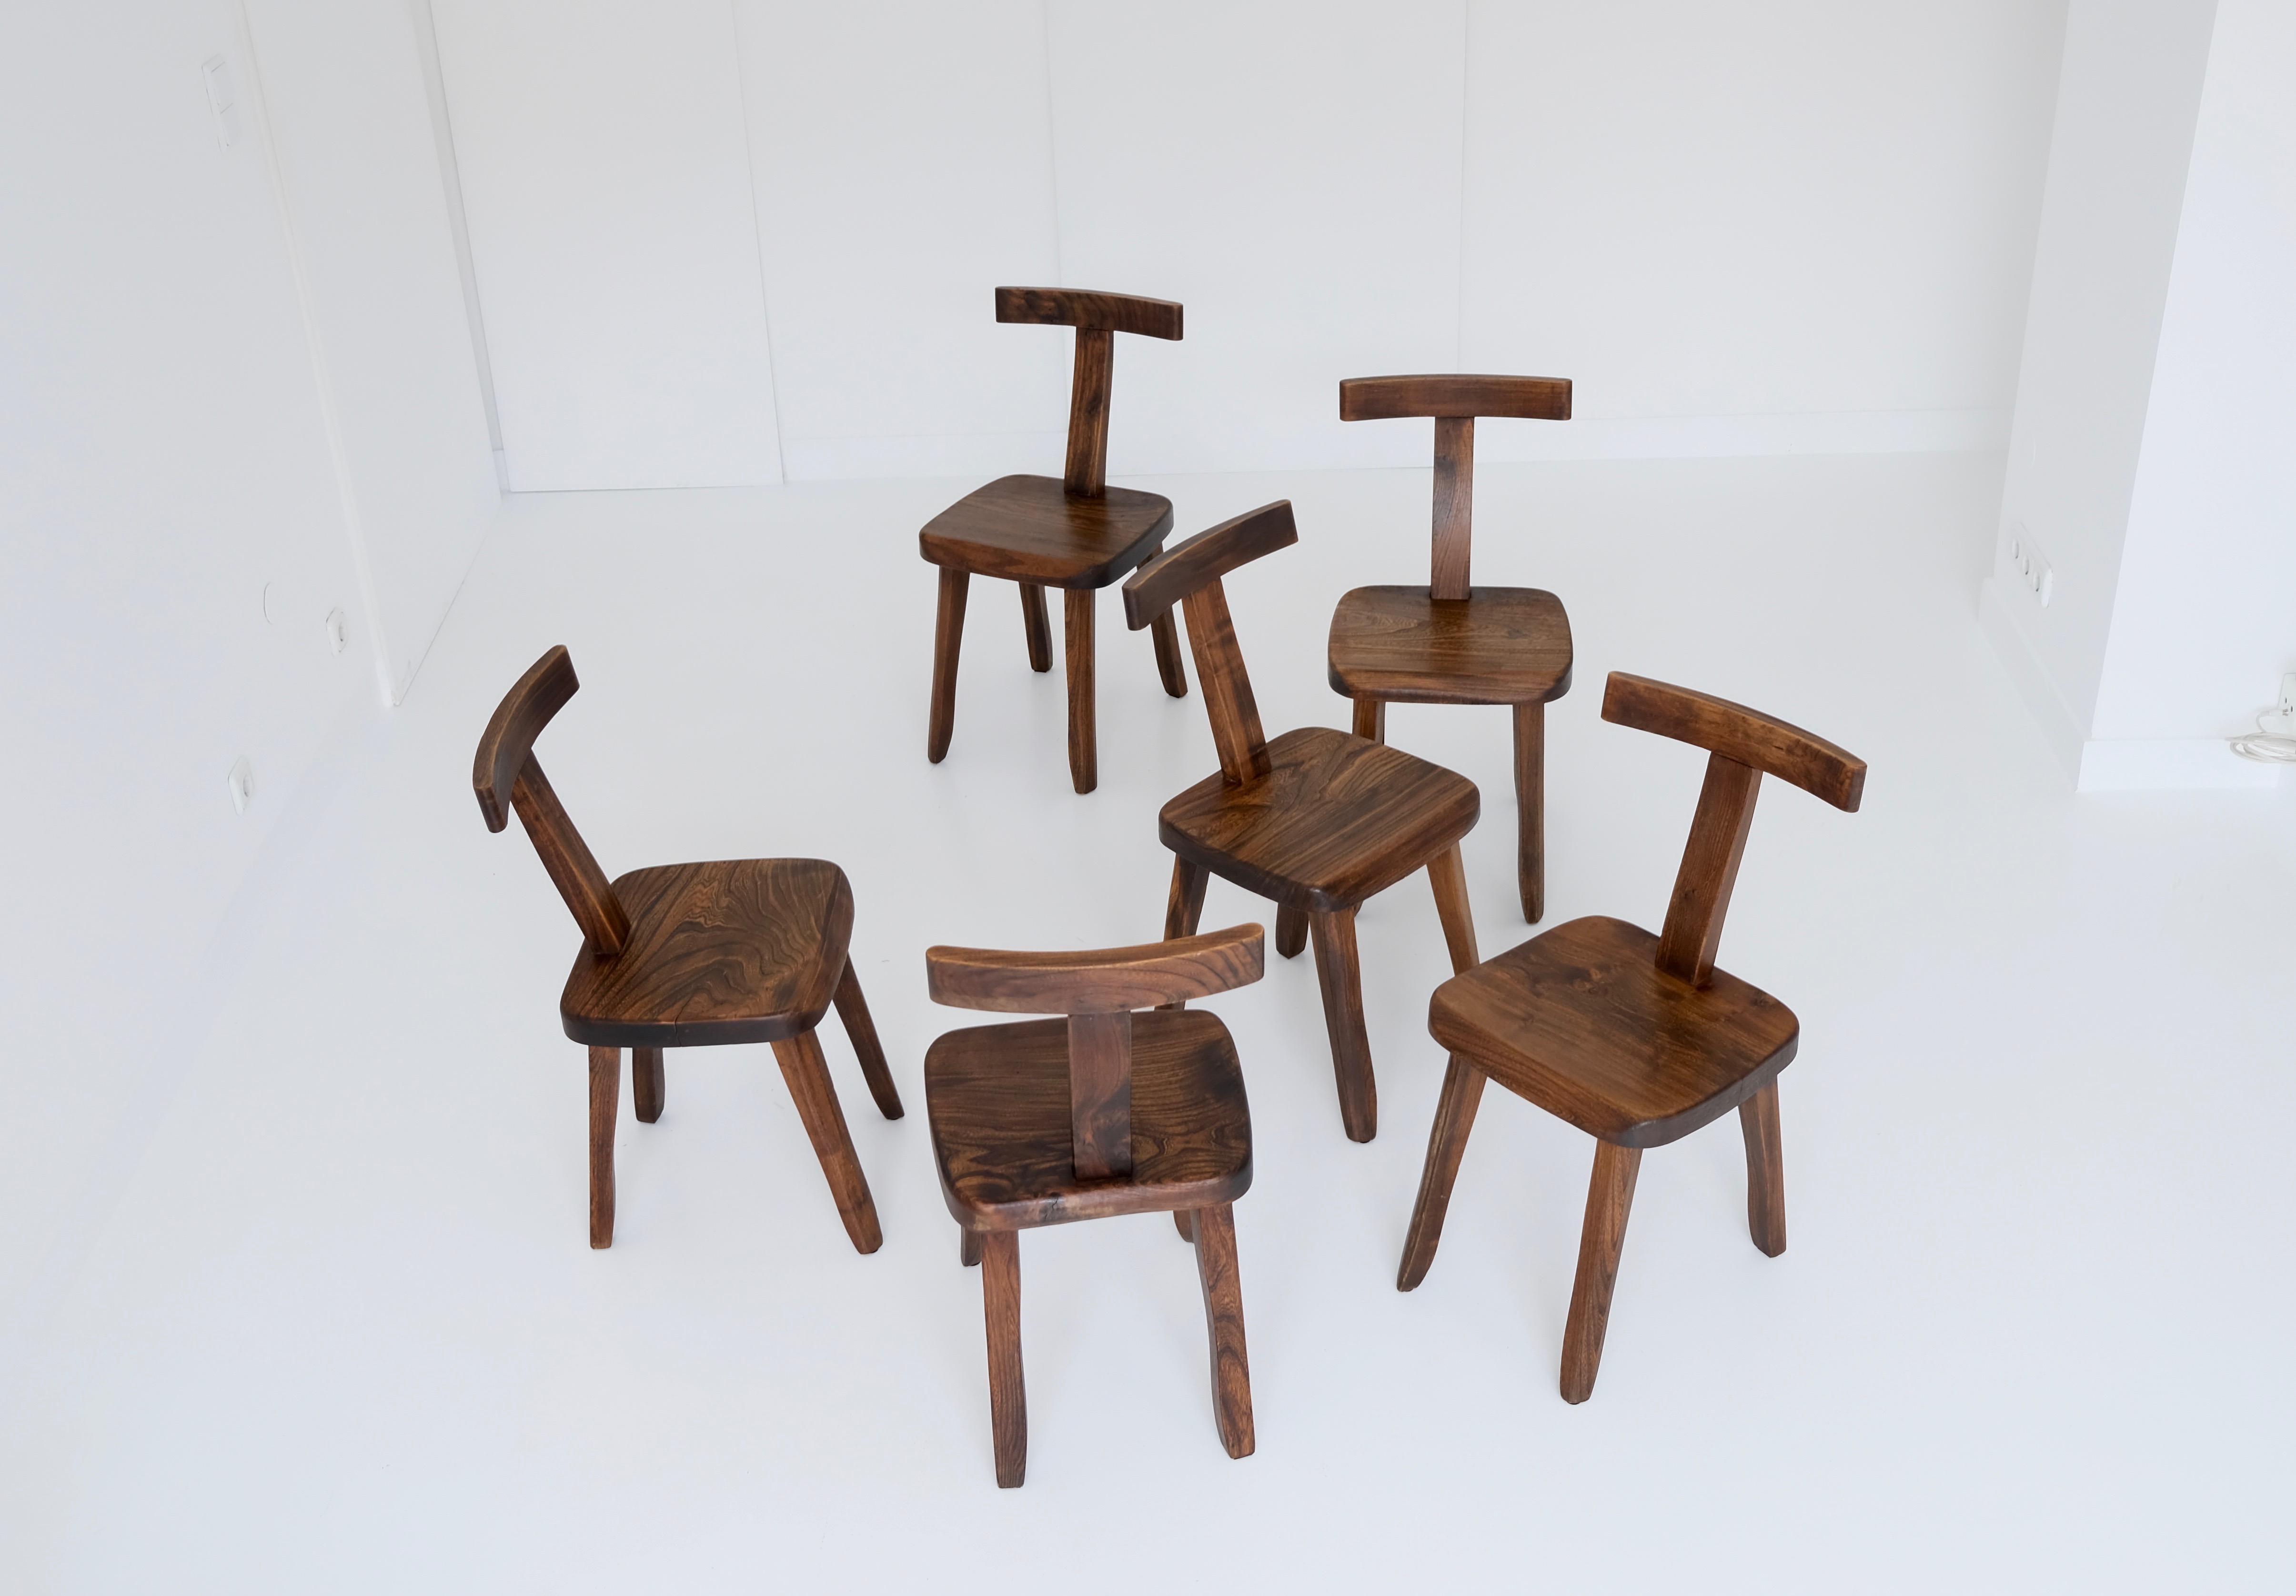 The solid chairs are made of stained elm wood and sculpturally crafted by hand. Rustic, minimalistic, brutalistic – bringing a sense of organic power to every understated design interior.